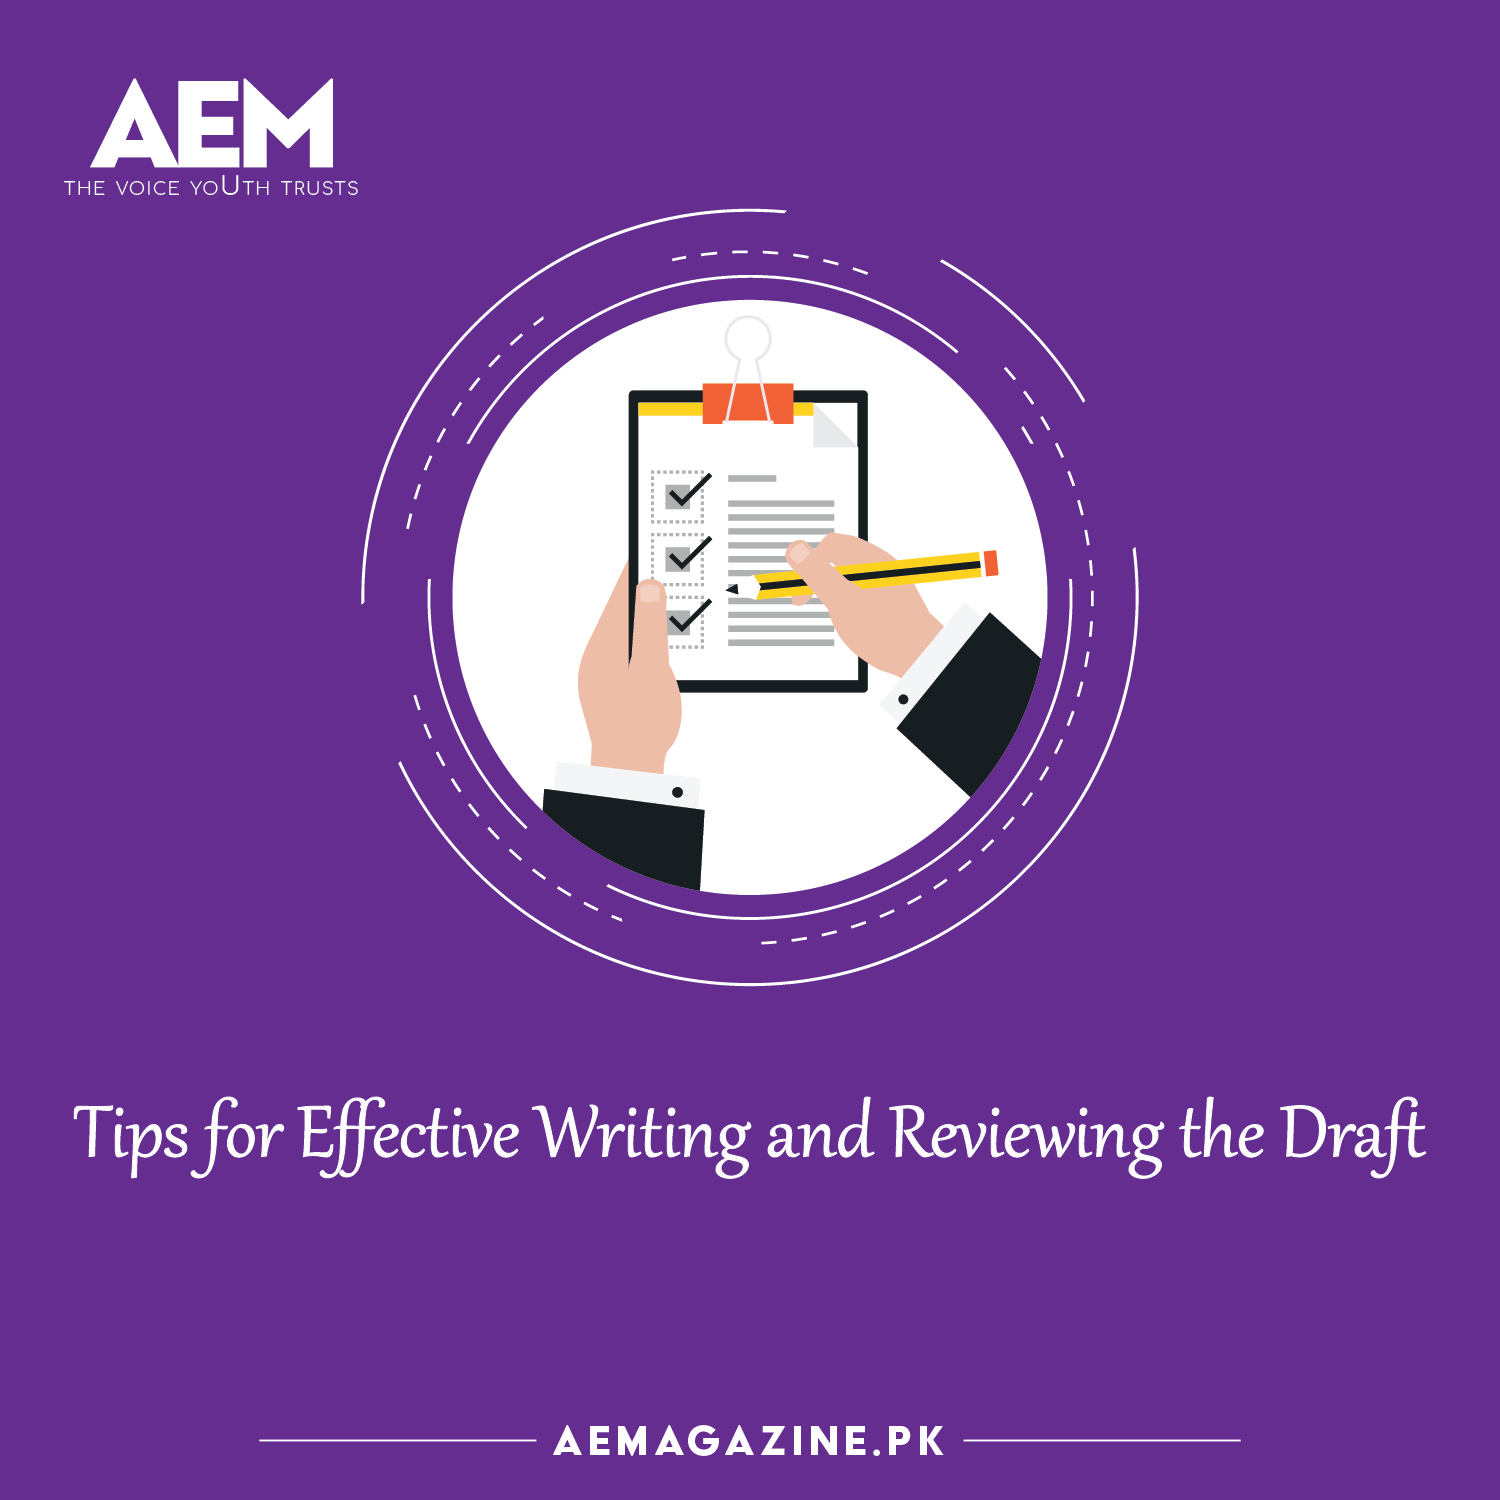 Tips for Effective Writing and Reviewing the Draft